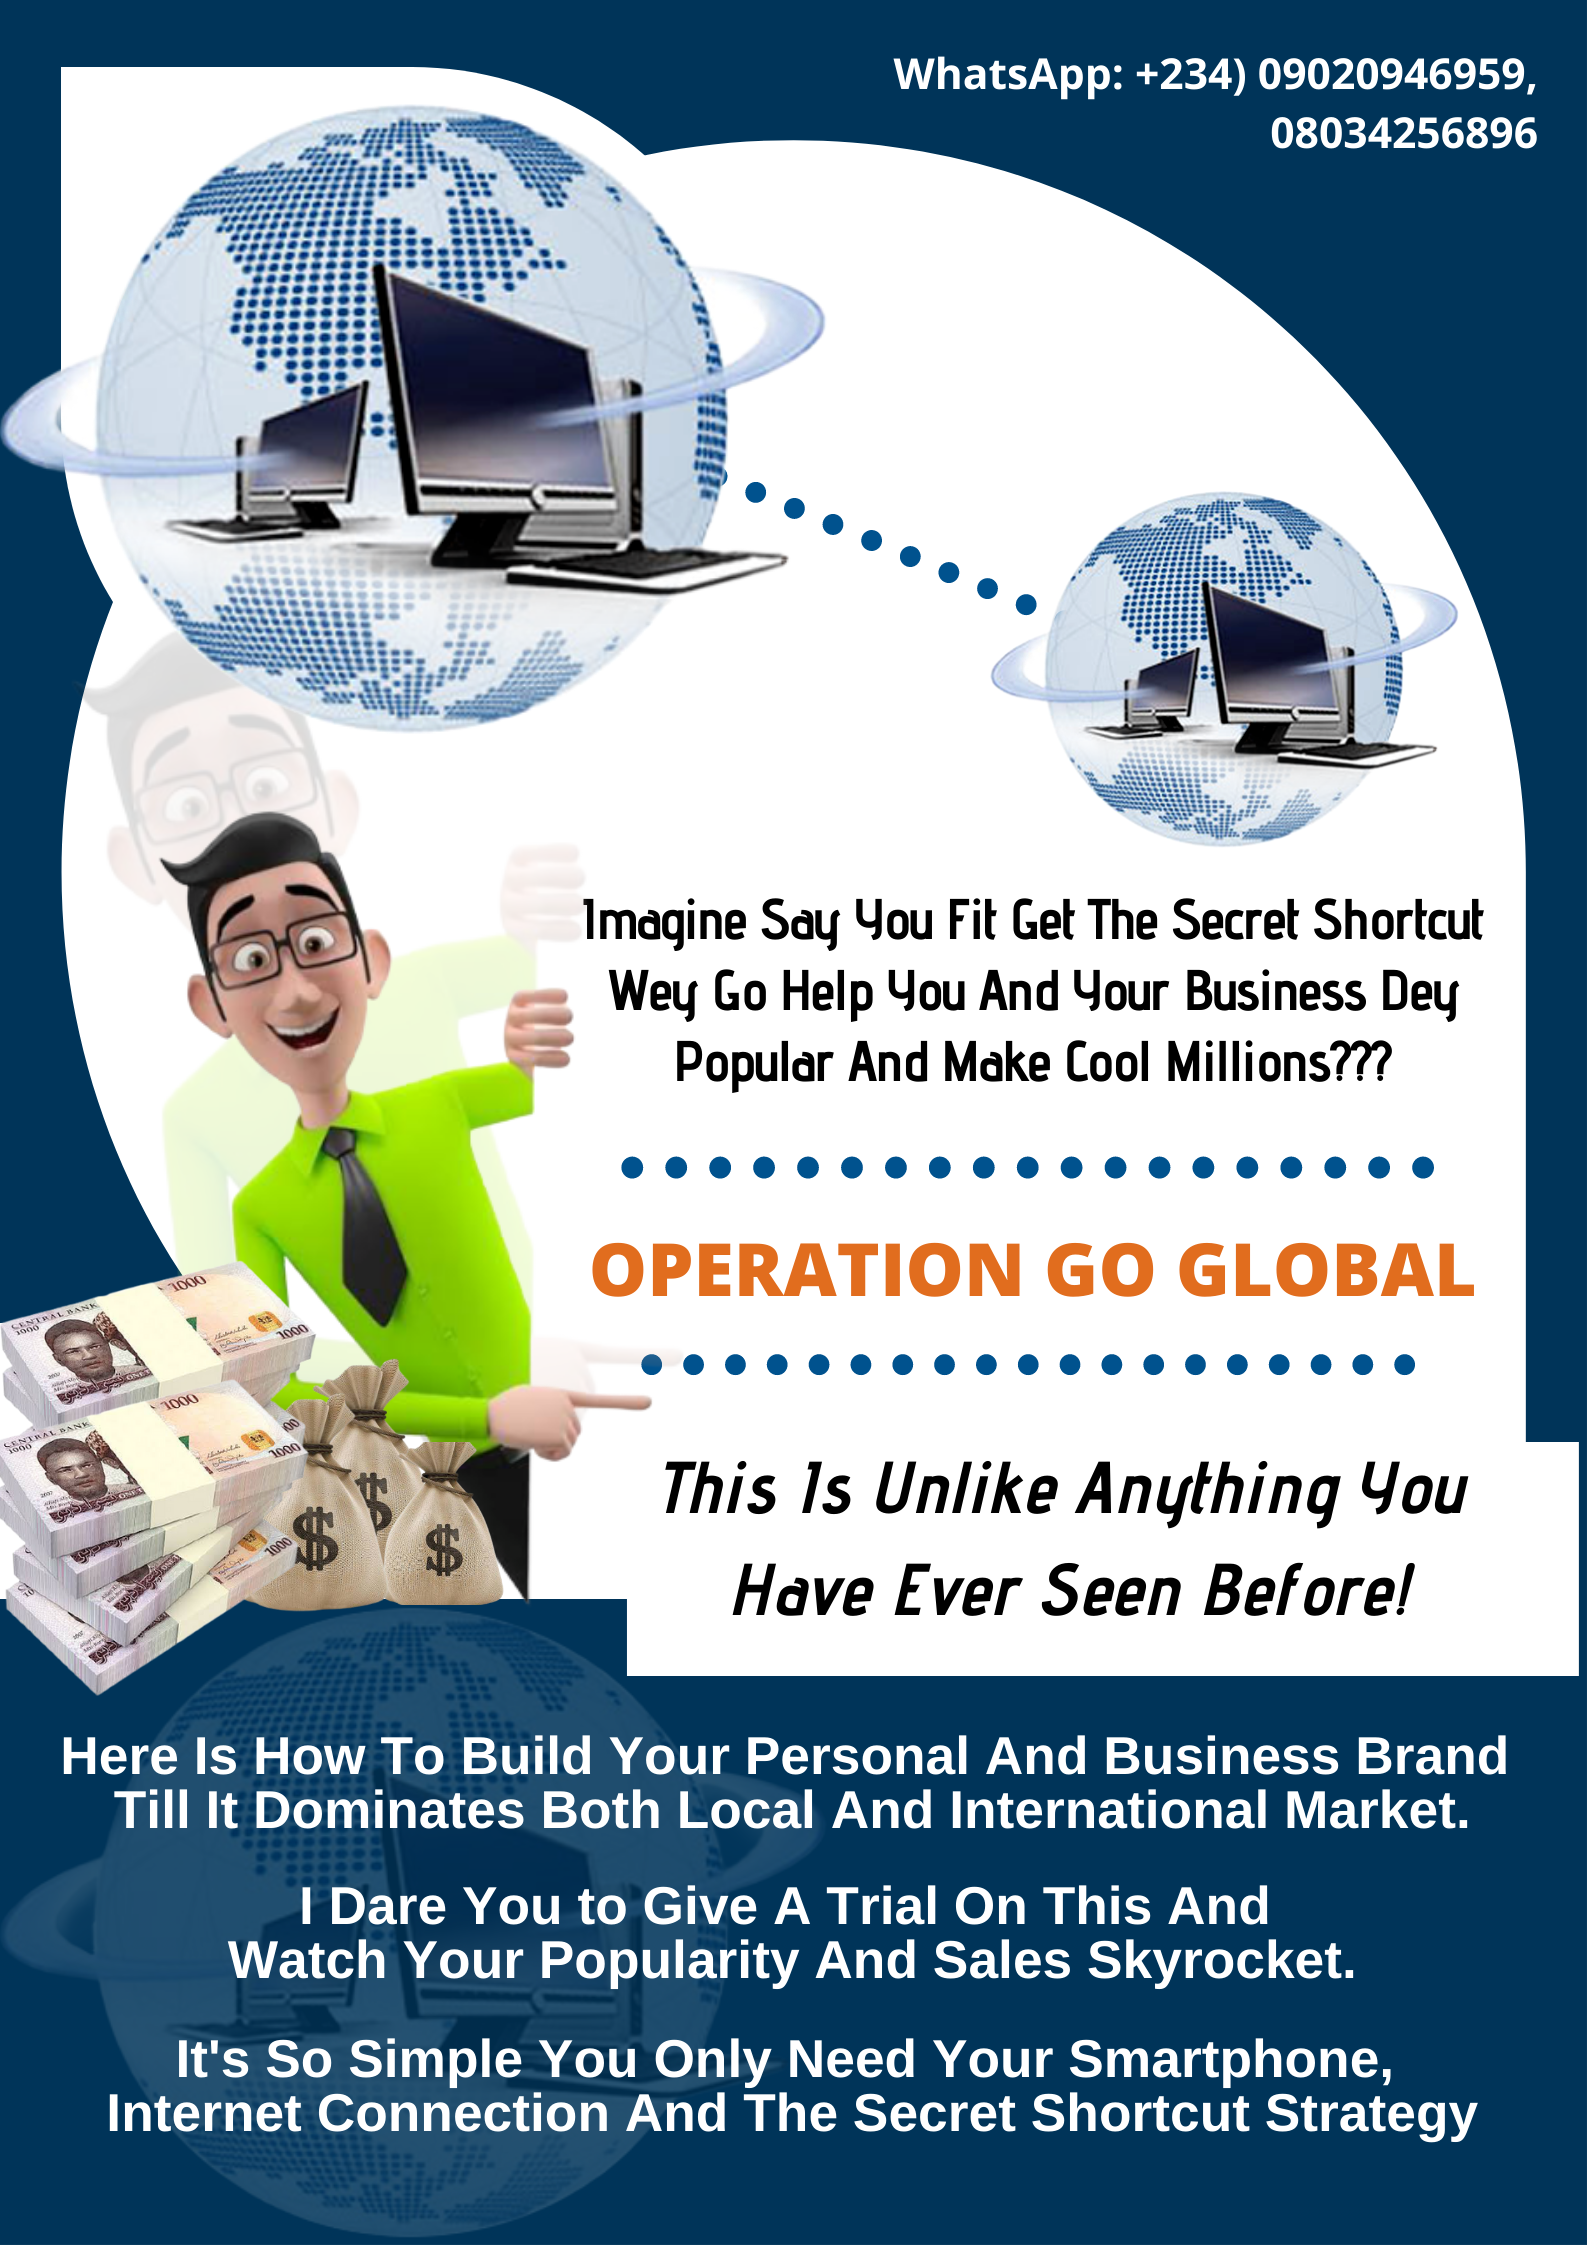 WhatsApp: +234) 09020946959,
08034256896

wiitin, wr"

alii,

Imagine Say You Fit Get The Secret Shortcut
~ Wey Go Help You And Your Business Dey
= Popular And Make Cool Millions???

OPERATION GO GLOBAL

This Is Unlike Anything You
Have Ever Seen Before!

Here Is How To Build Your Personal And Business Brand
Till It Dominates Both Local And International Market.

I Dare You to Give A Trial On This And
Watch Your Popularity And Sales Skyrocket.

It's So Simple You Only Need Your Smartphone,
Internet Connection And The Secret Shortcut Strategy